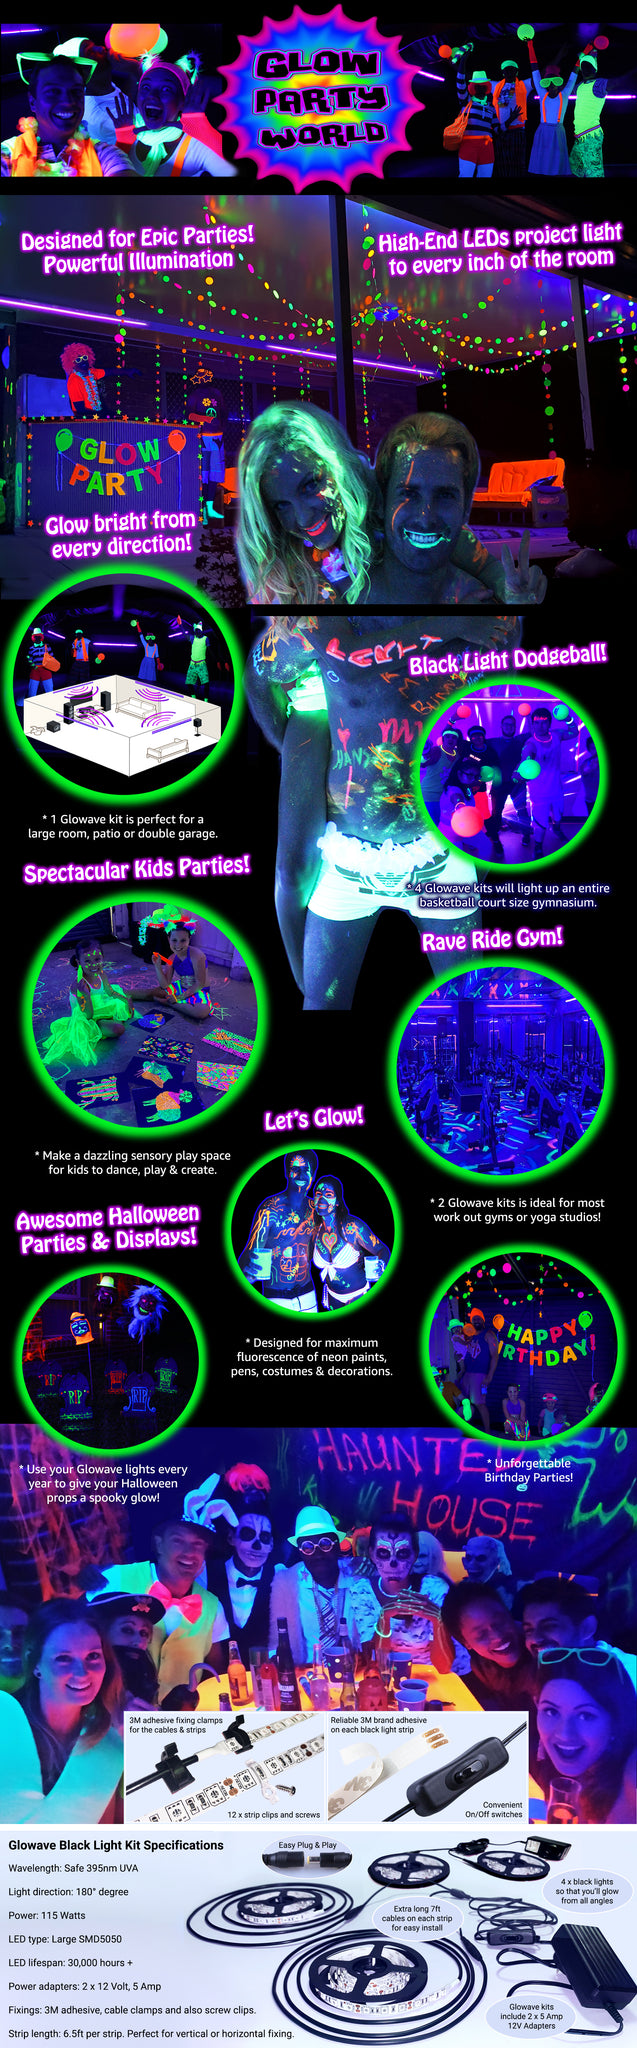 Black Lights for Glow Party! 115W Blacklight LED Strip kit. 4 UV Lights to  Surround Your Neon Party. Ultraviolet Lighting for Big Rooms. Easy Set up!